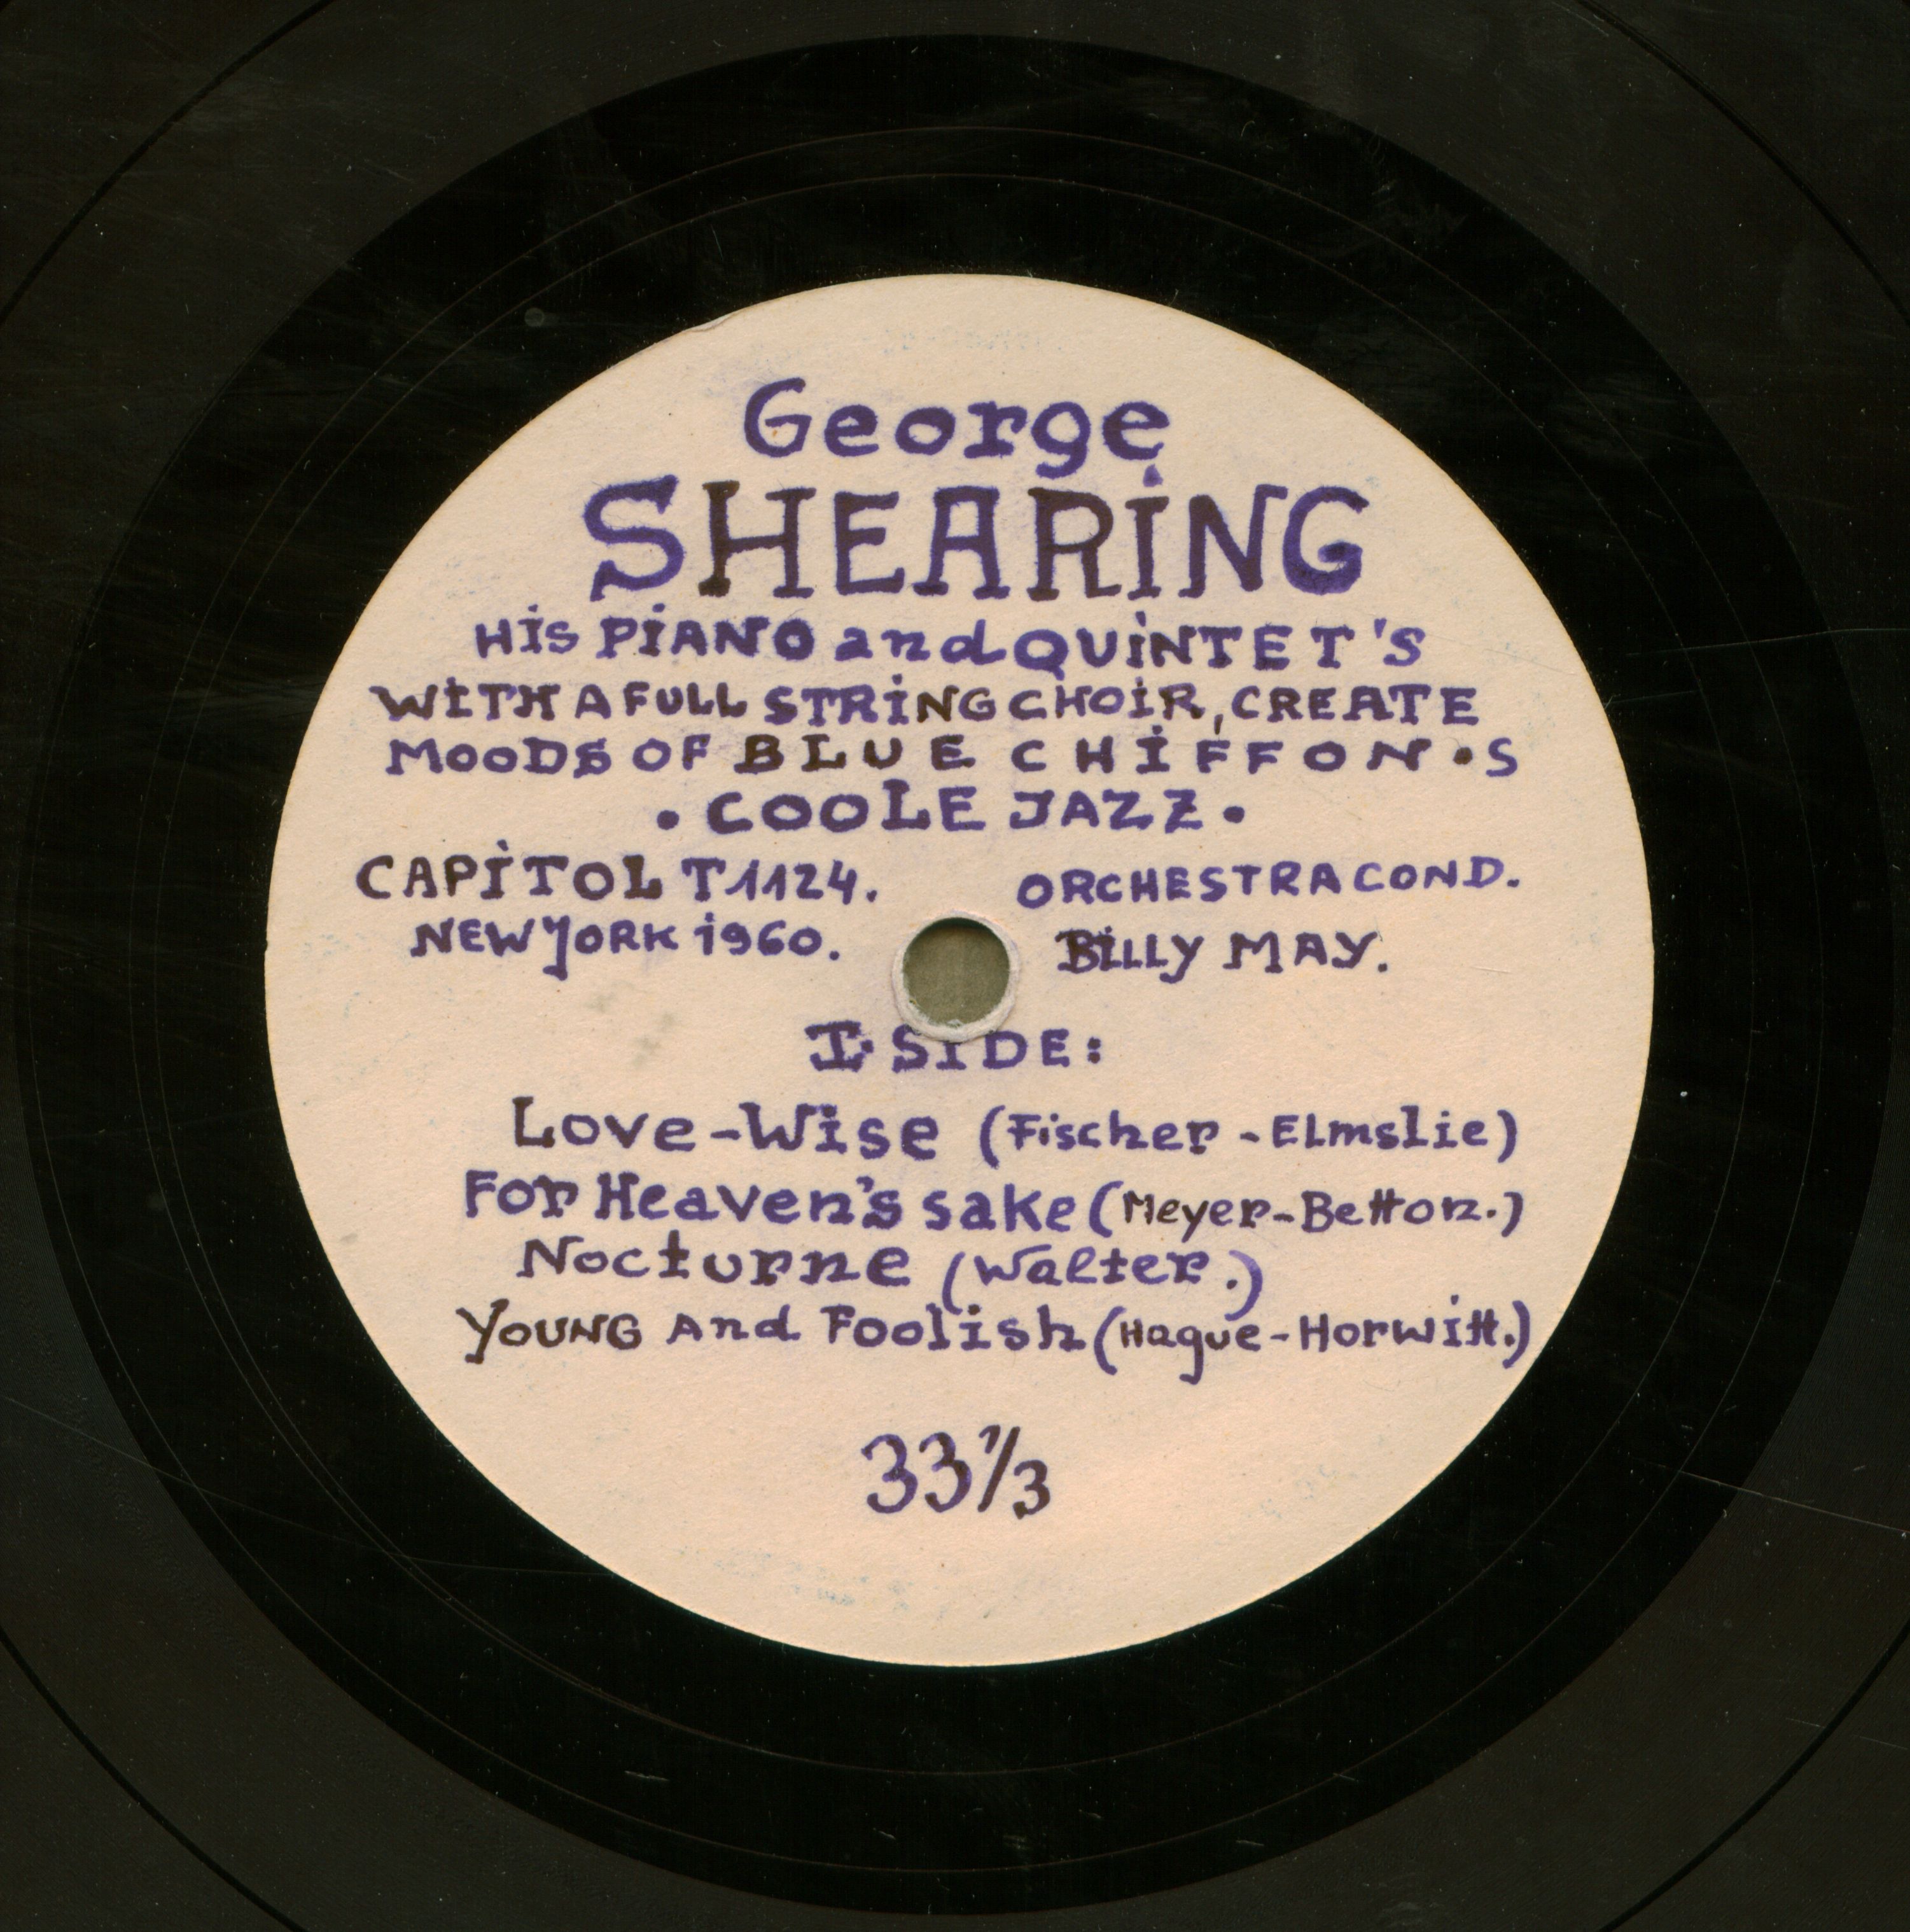 George Shearing his piano and quintett's coole jazz